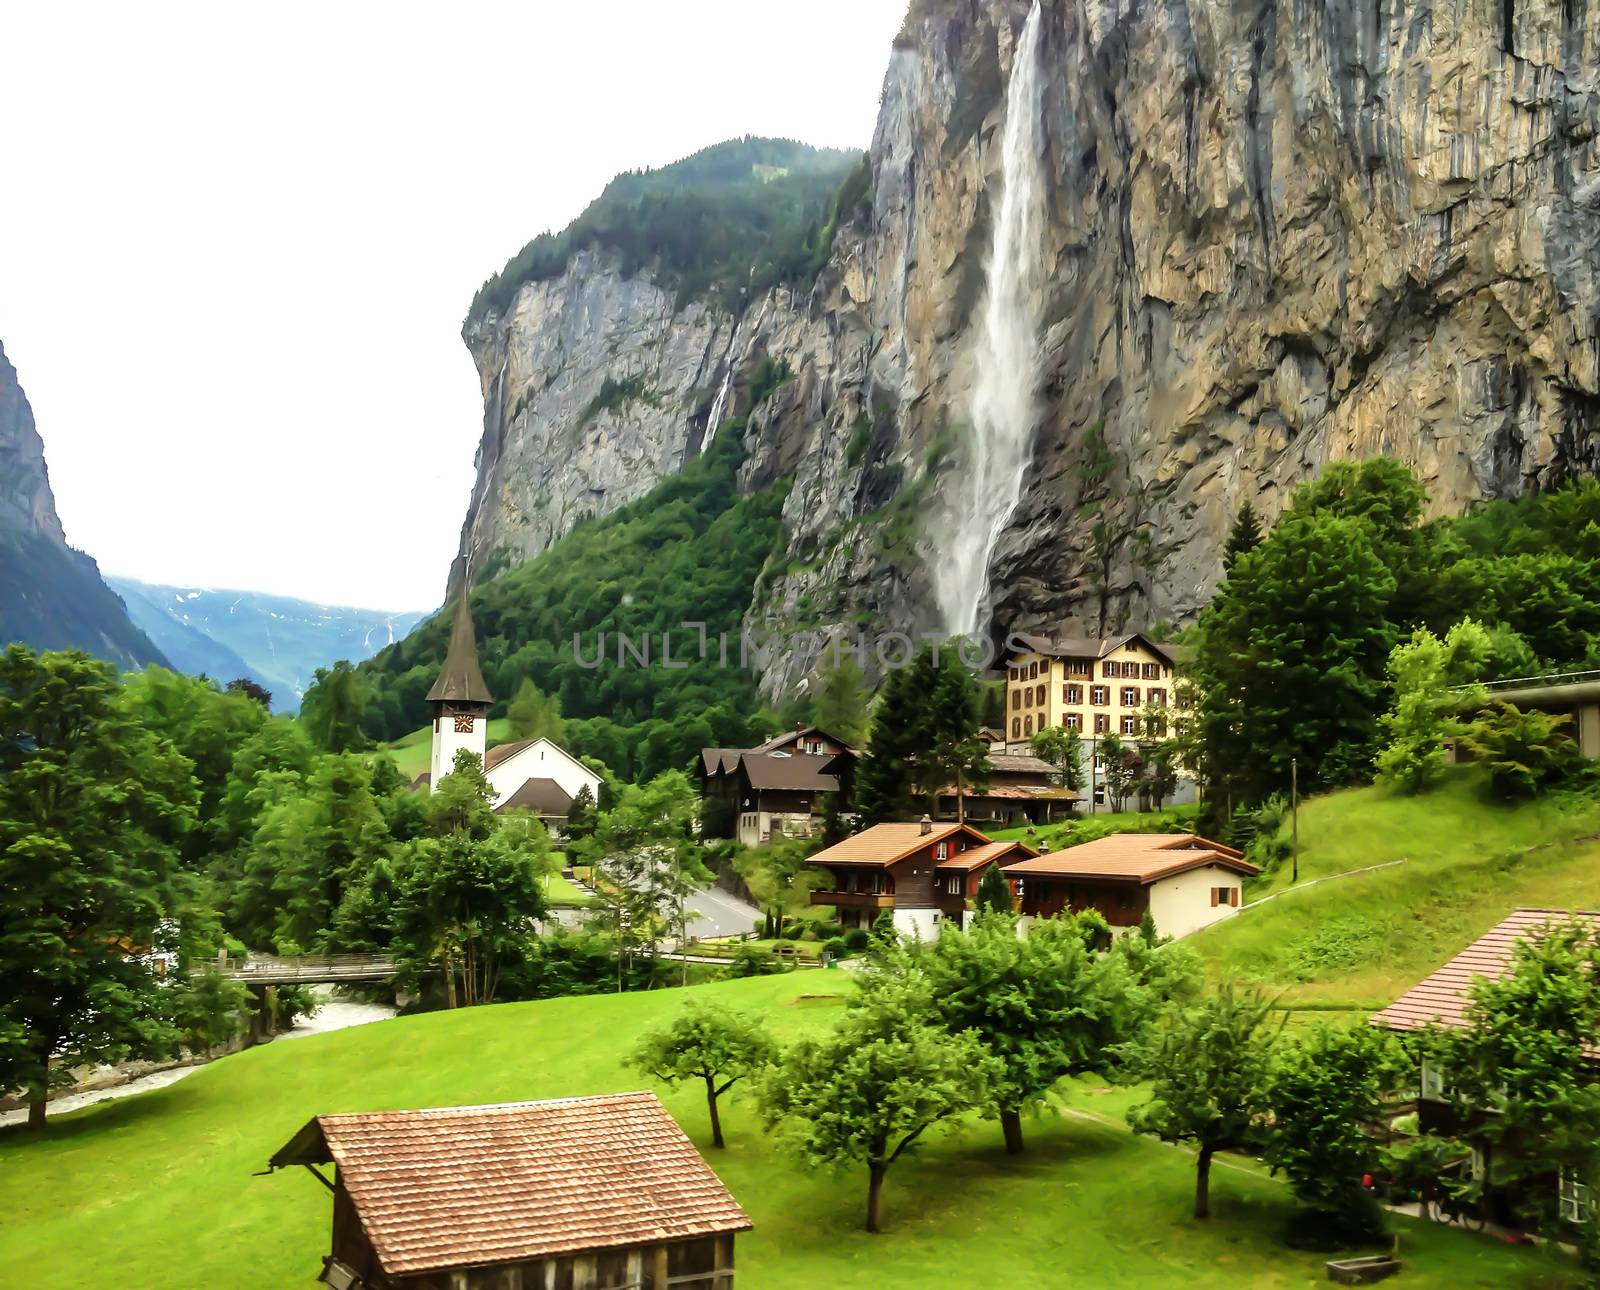 Beautiful Staubbachfall waterfall flowing down the picturesque Lauterbrunnen valley and village in Bern canton, Switzerland, Europe by victorflowerfly